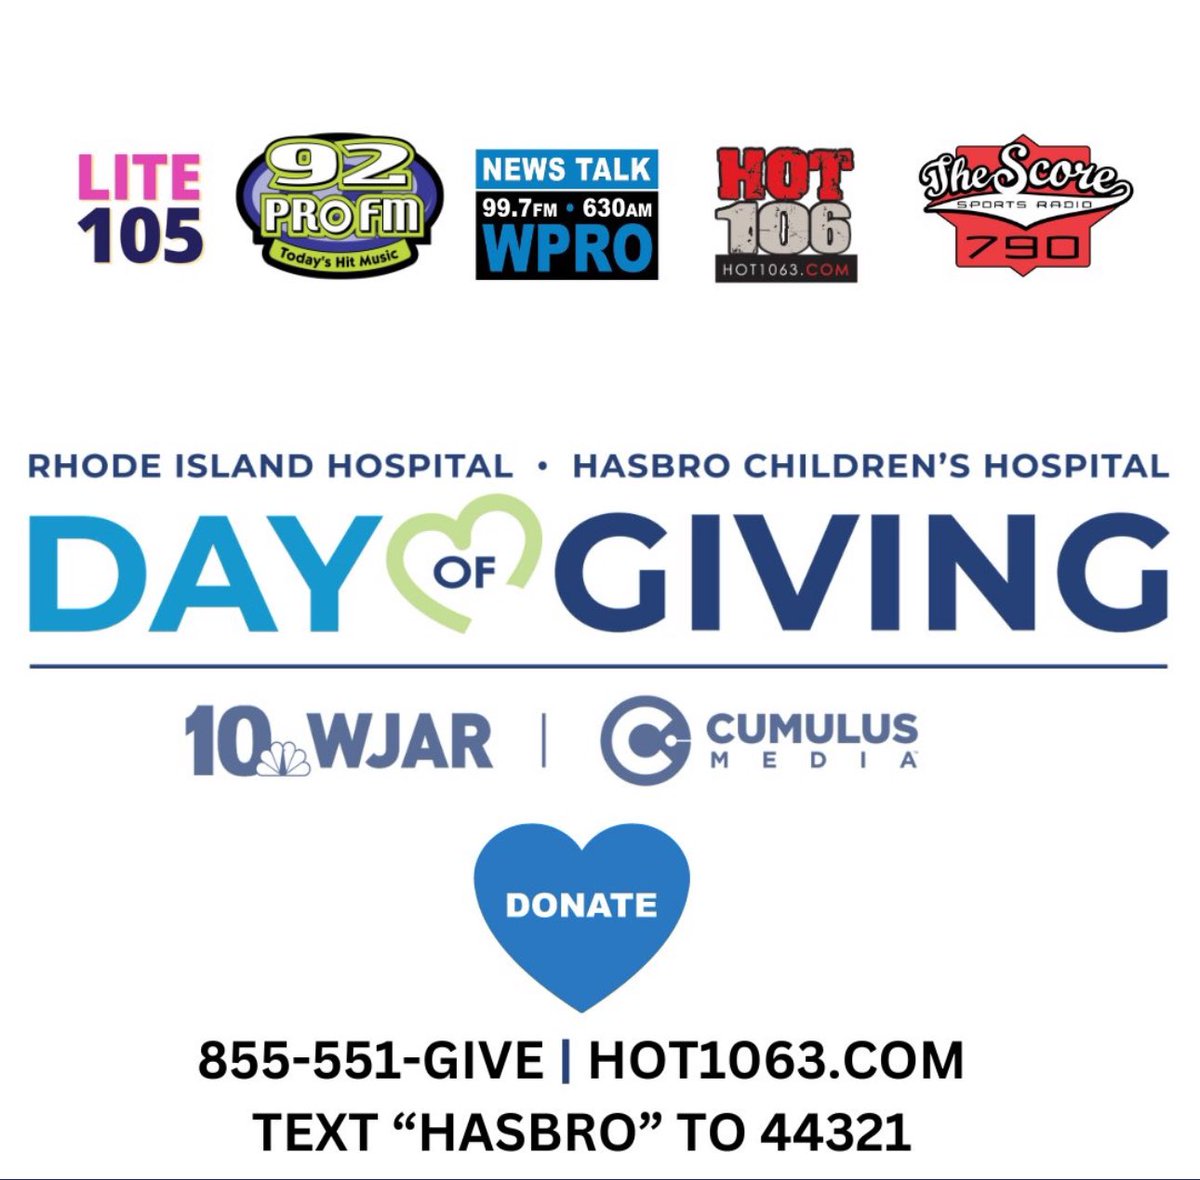 Our #DayofGiving with @NBC10 to benefit @RIHospital & @HasbroChildrens continues with @nickonair_ until 7pm To donate⬇️ Call: 855-551-4483 Text: 'Hasbro' to 44321 Online: hot1063.com